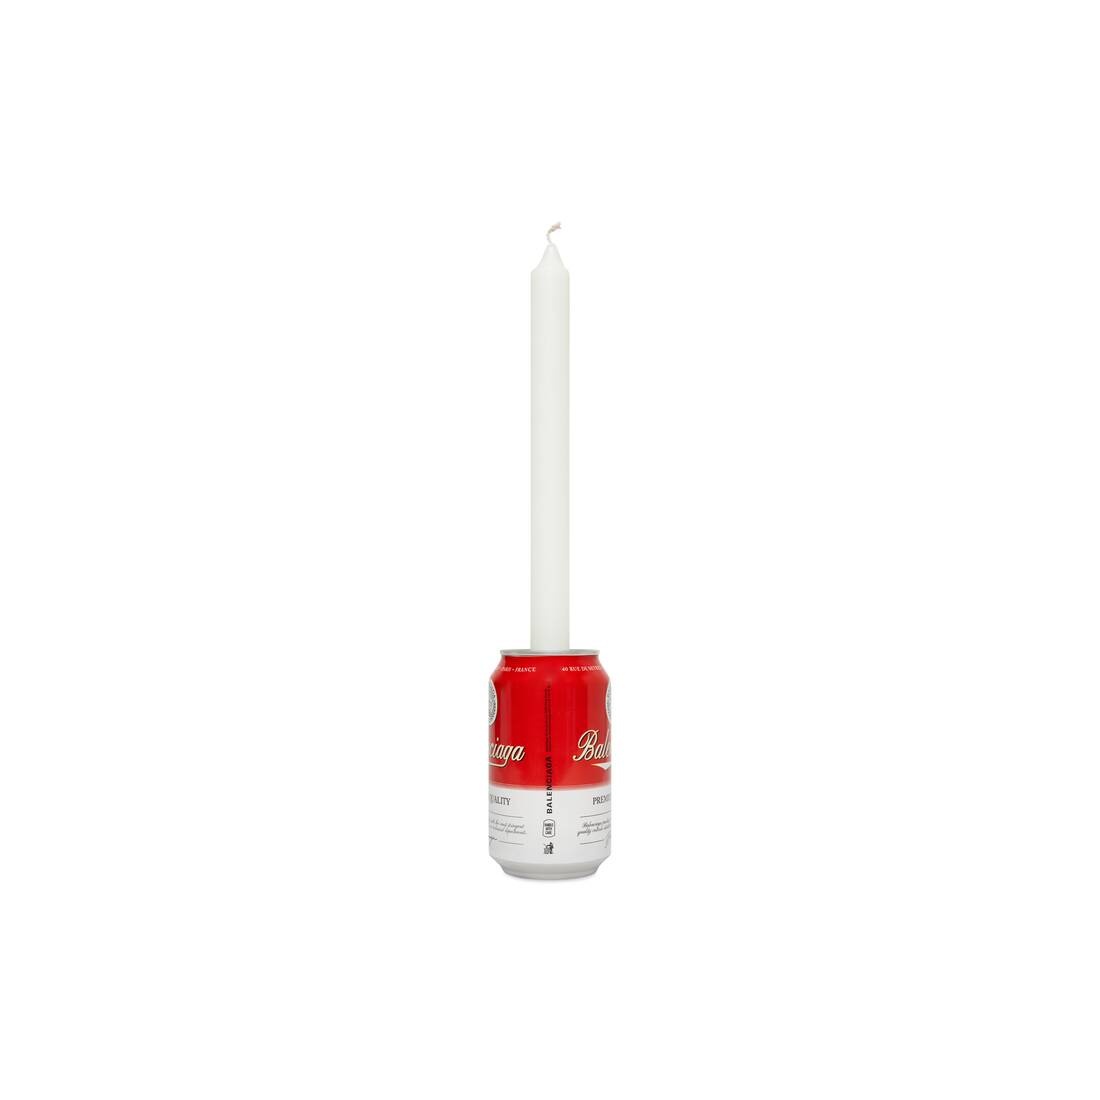 Candle Holder in Red - 3